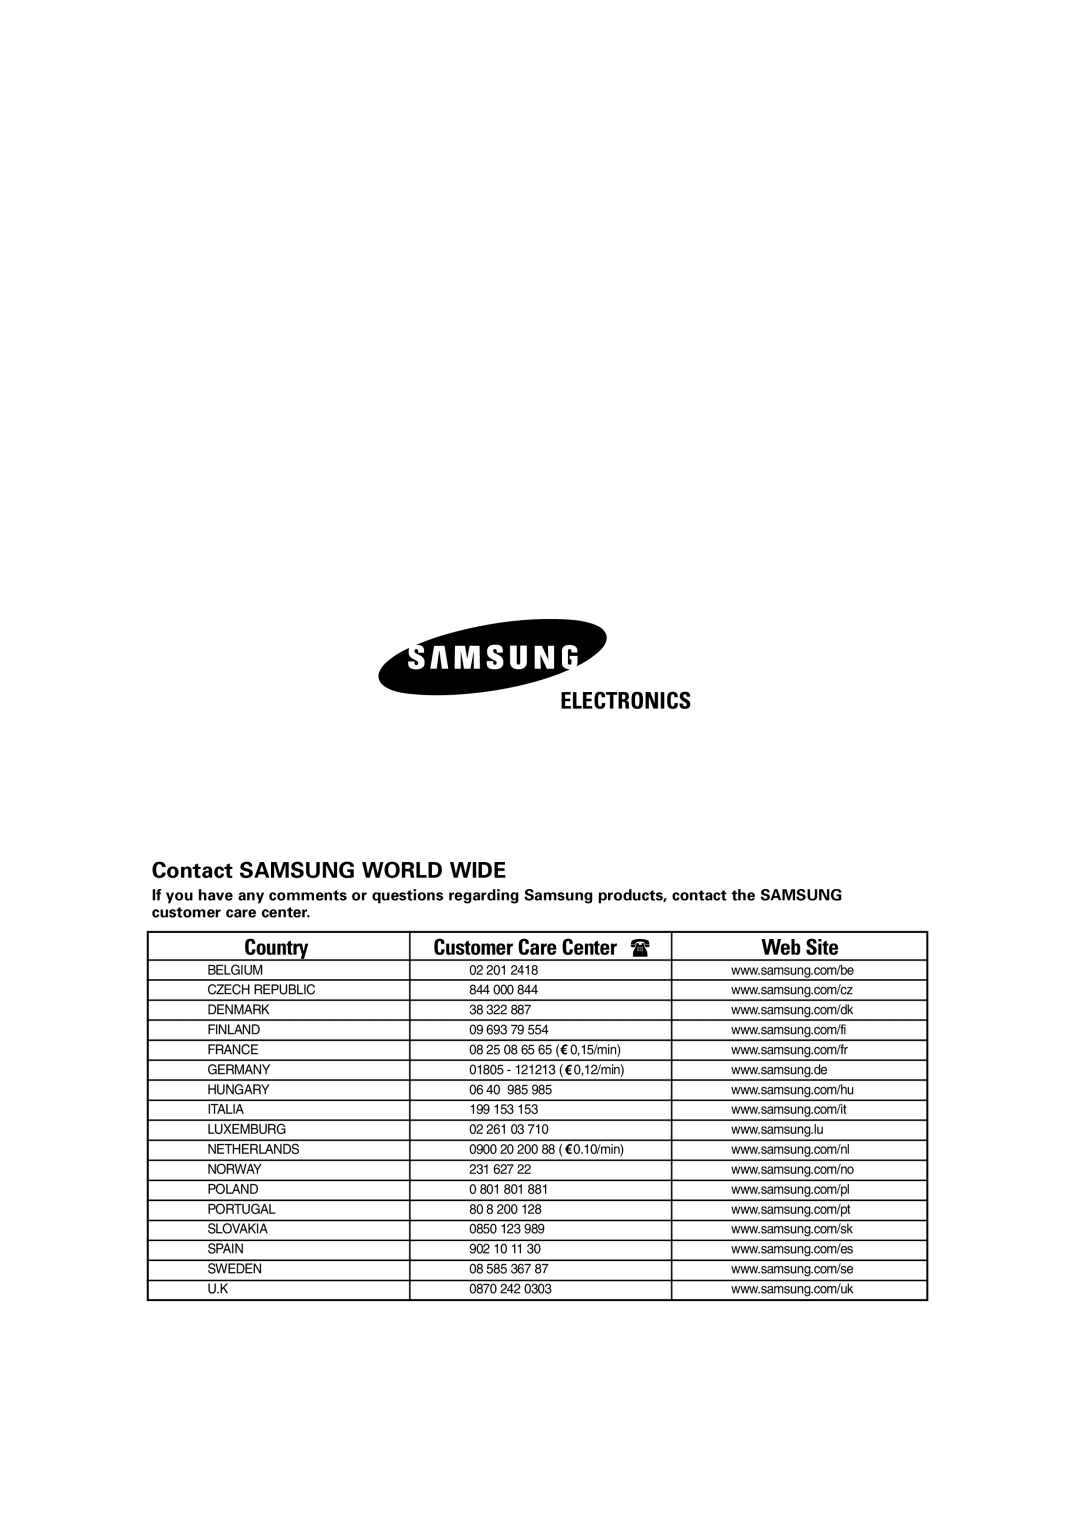 Samsung AS09HPBN manual Electronics, Contact SAMSUNG WORLD WIDE, Country, Customer Care Center, Web Site, Printed in Korea 